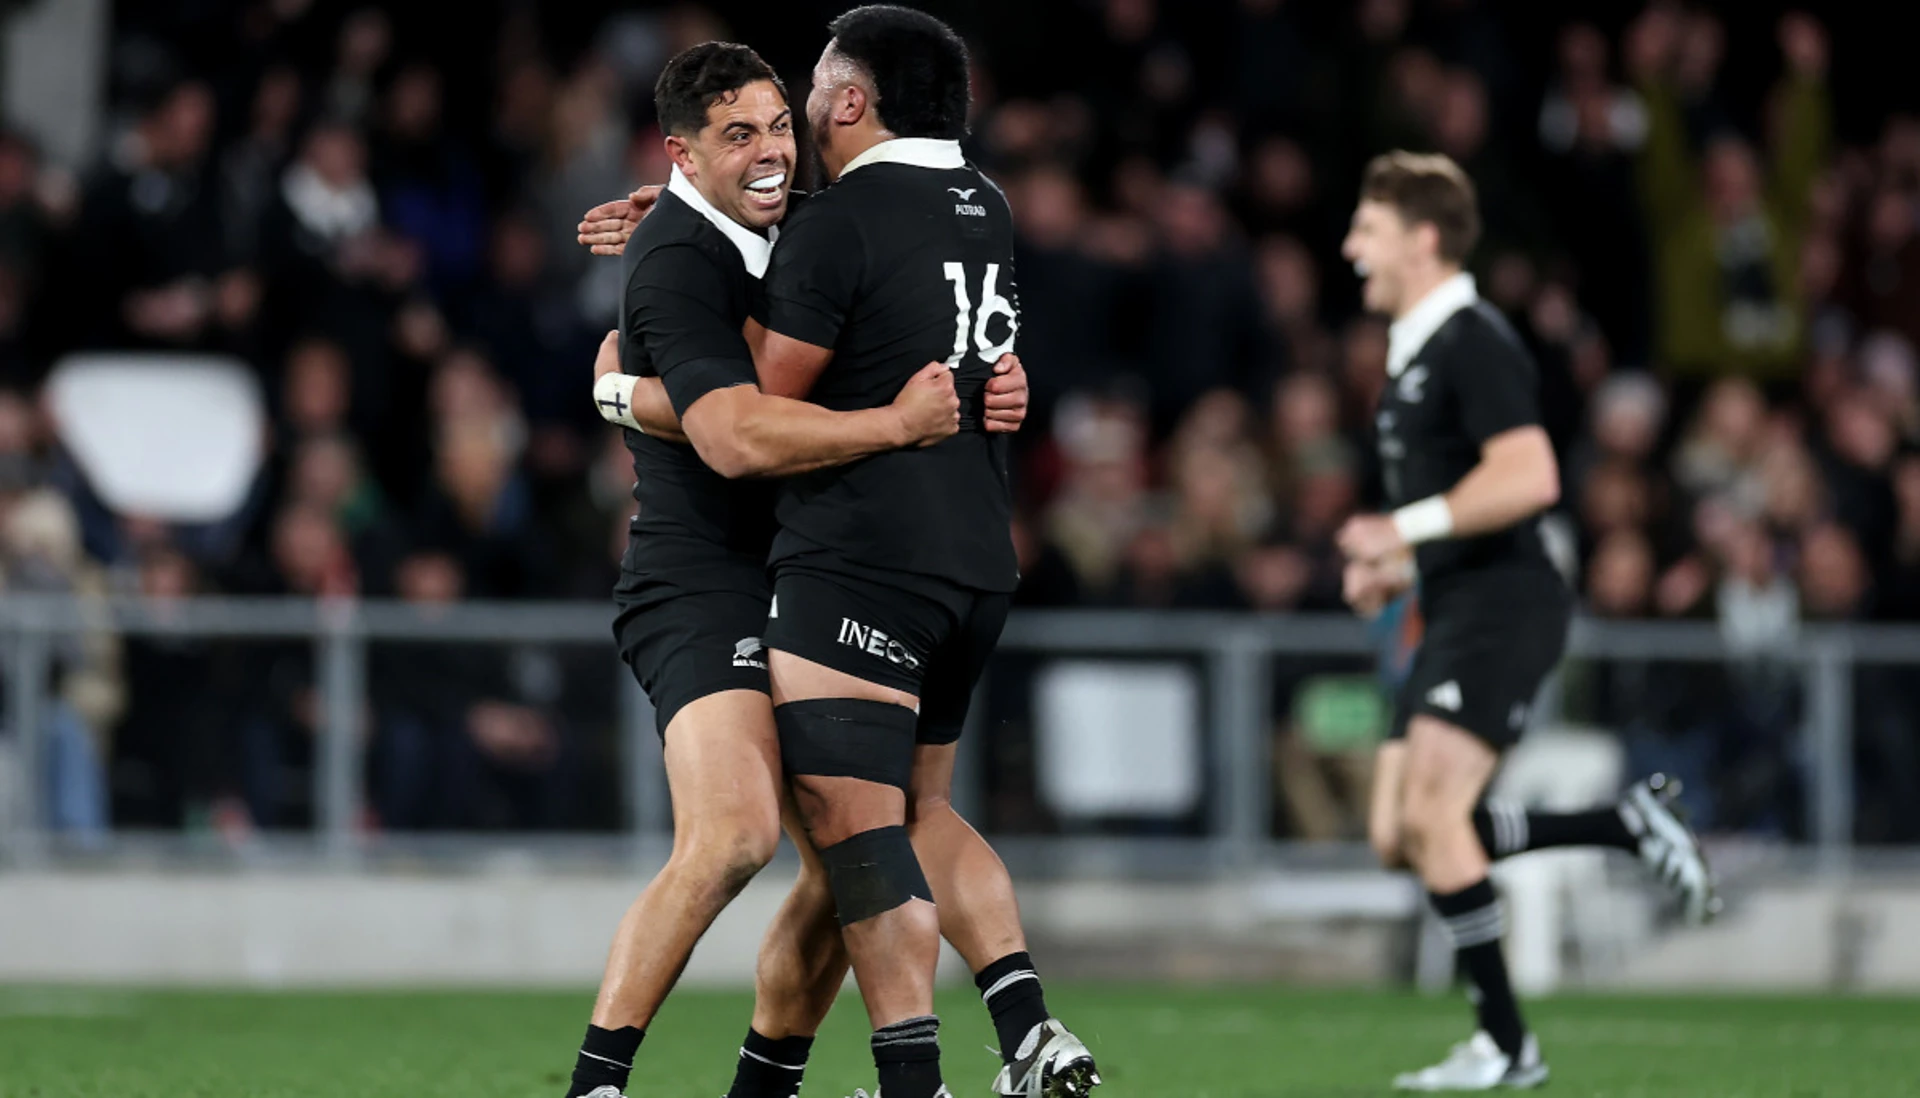 New Zealand edge England 16-15 in tense, brutal first test